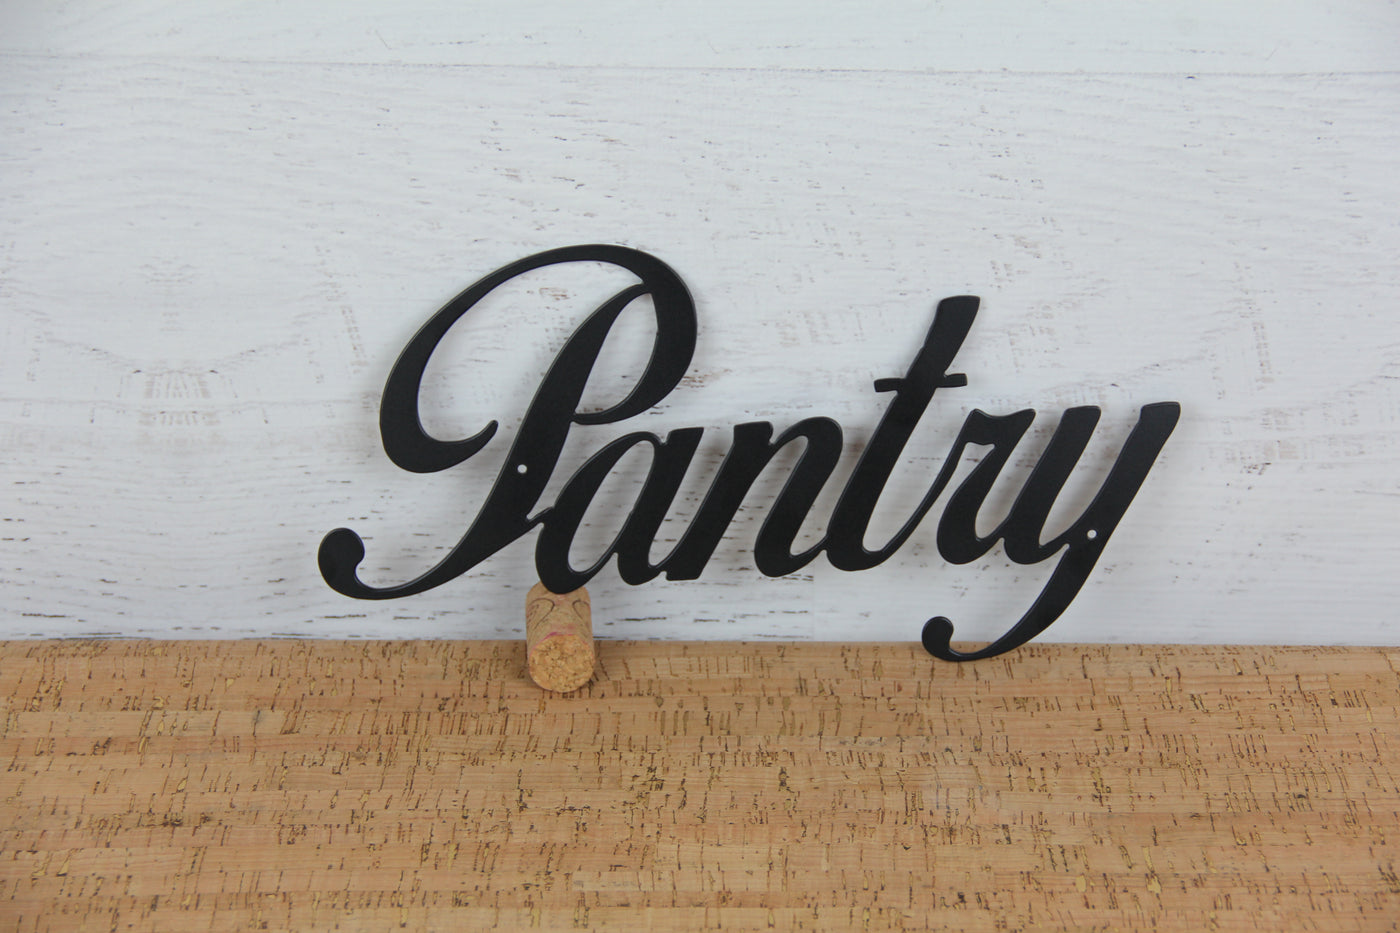 Pantry Metal Word Sign - Madison Iron and Wood - Wall Art - metal outdoor decor - Steel deocrations - american made products - veteran owned business products - fencing decorations - fencing supplies - custom wall decorations - personalized wall signs - steel - decorative post caps - steel post caps - metal post caps - brackets - structural brackets - home improvement - easter - easter decorations - easter gift - easter yard decor